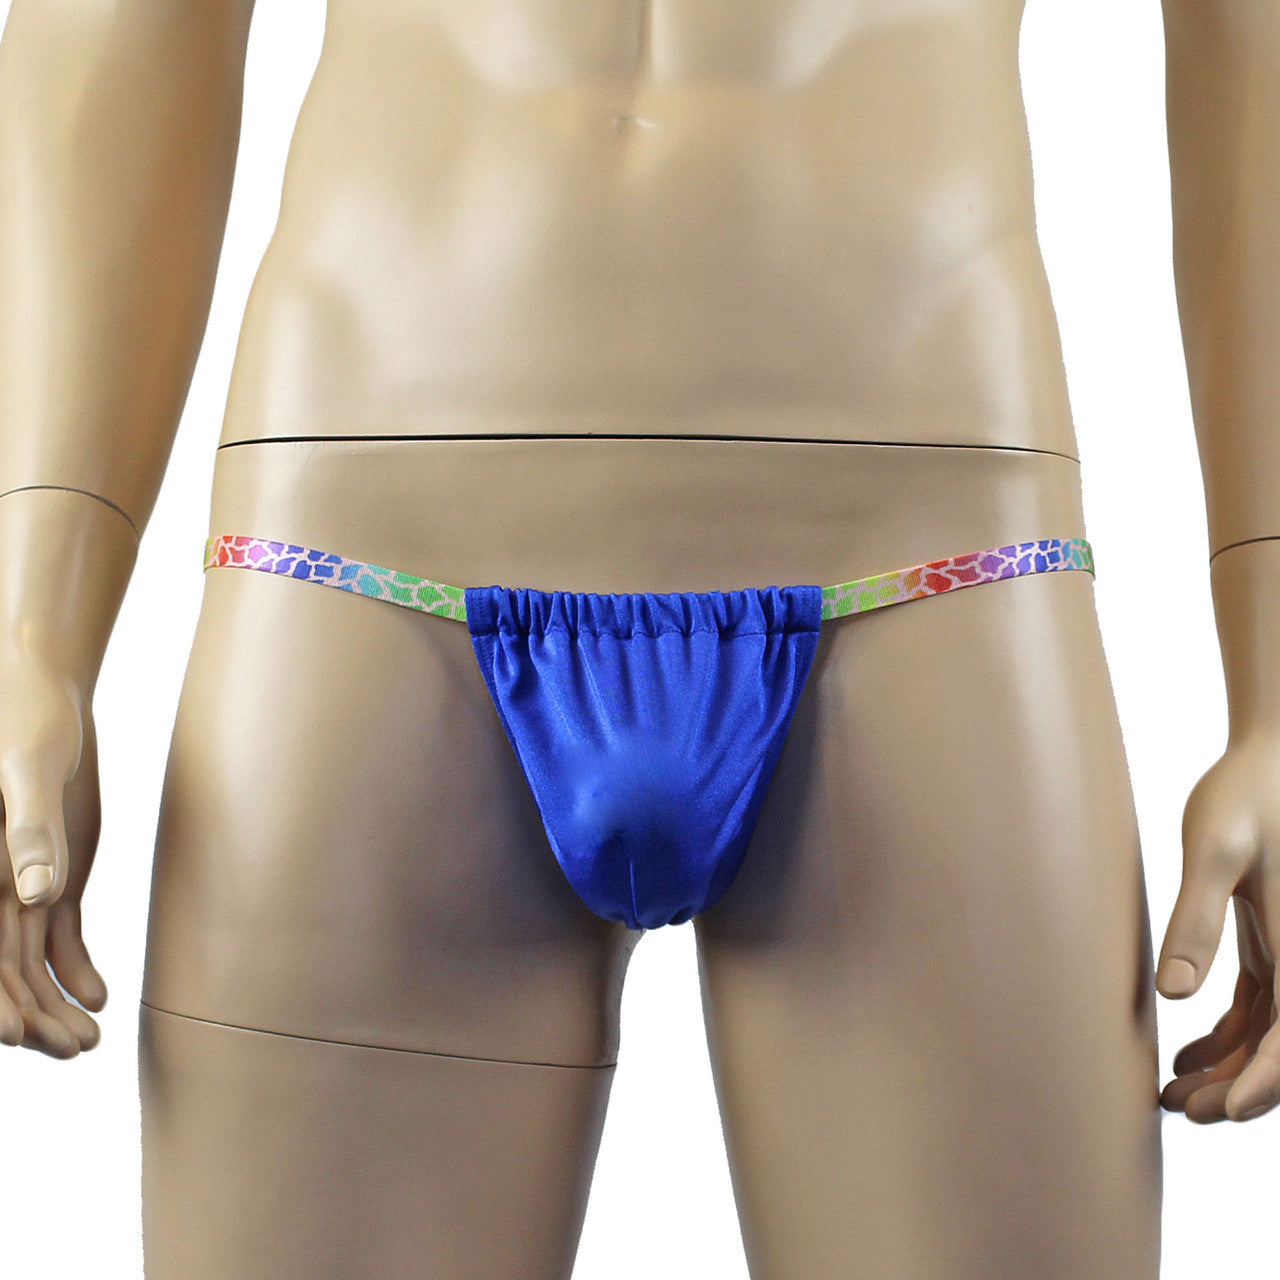 Mens Wild Colourful Adjustable Ball Bag Pouch G string Underwear (blue plus other colours)